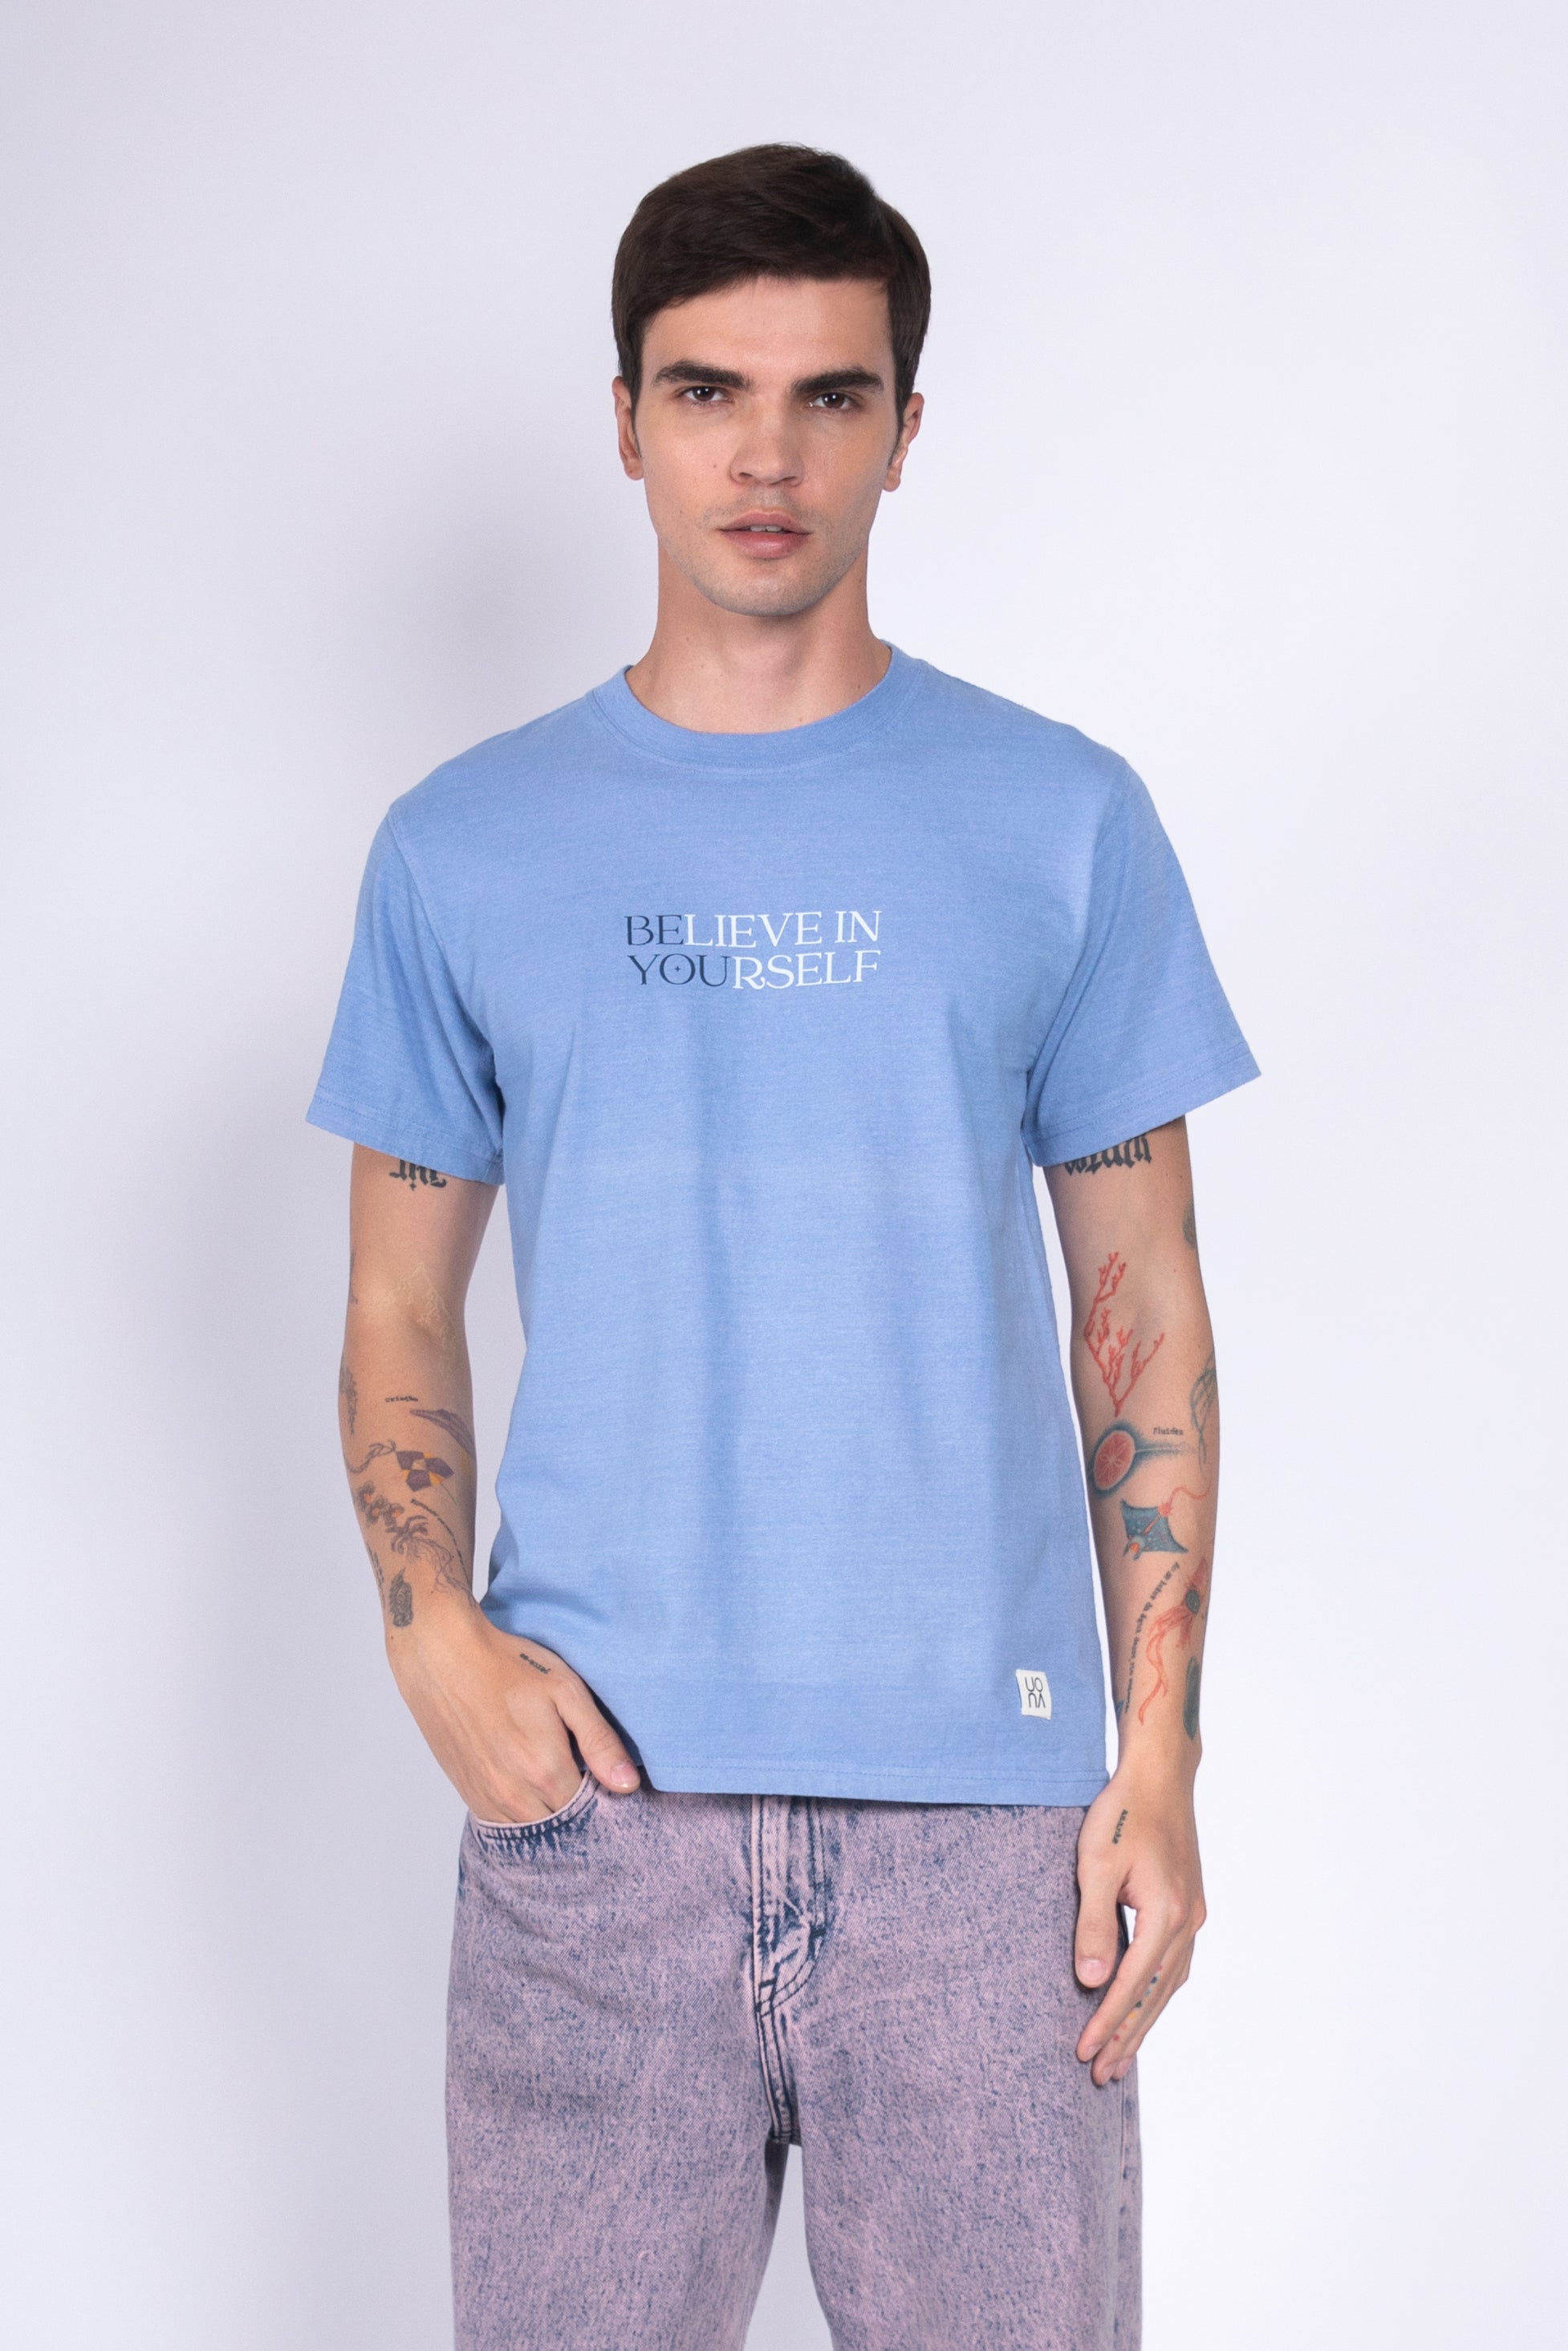 Recycled Vintage Washed Short Sleeve T-Shirt